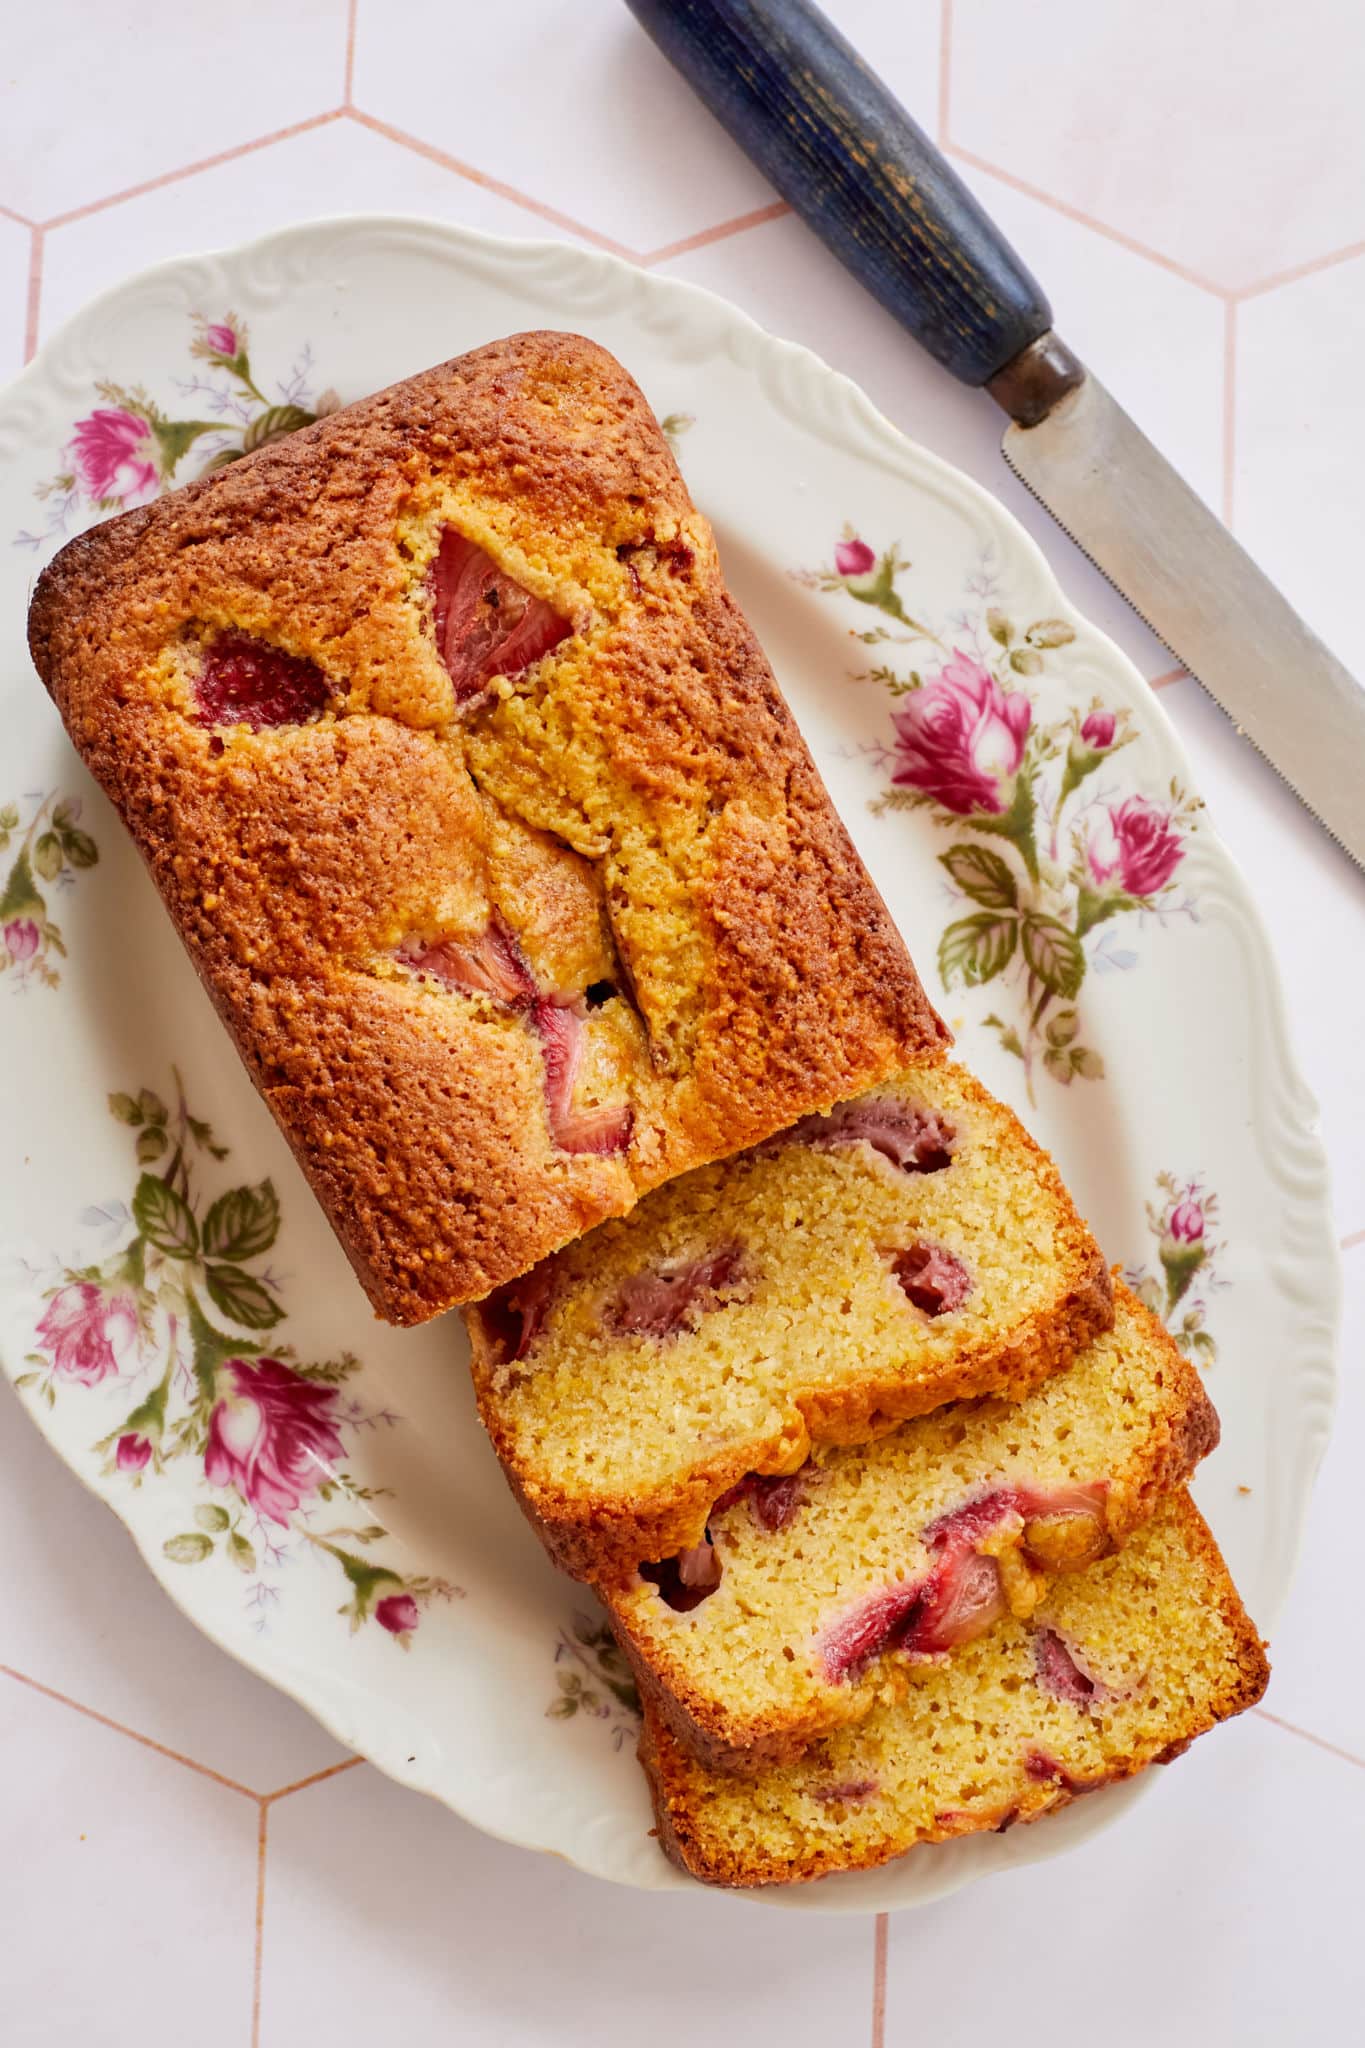 A strawberry cornmeal quick bread is displayed on a white serving platter with pink roses.